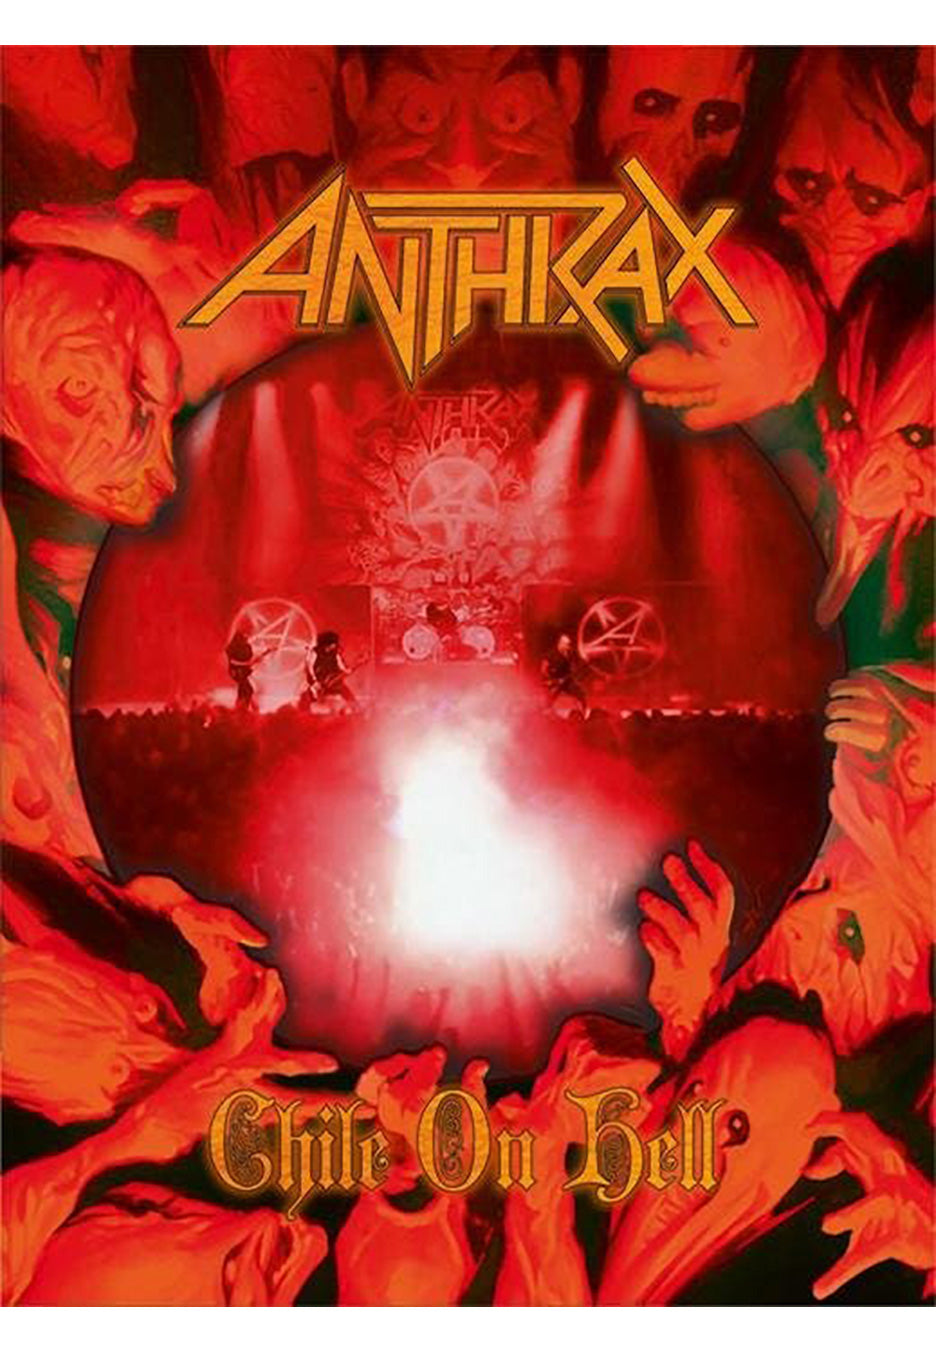 Anthrax - Chile On Hell - DVD